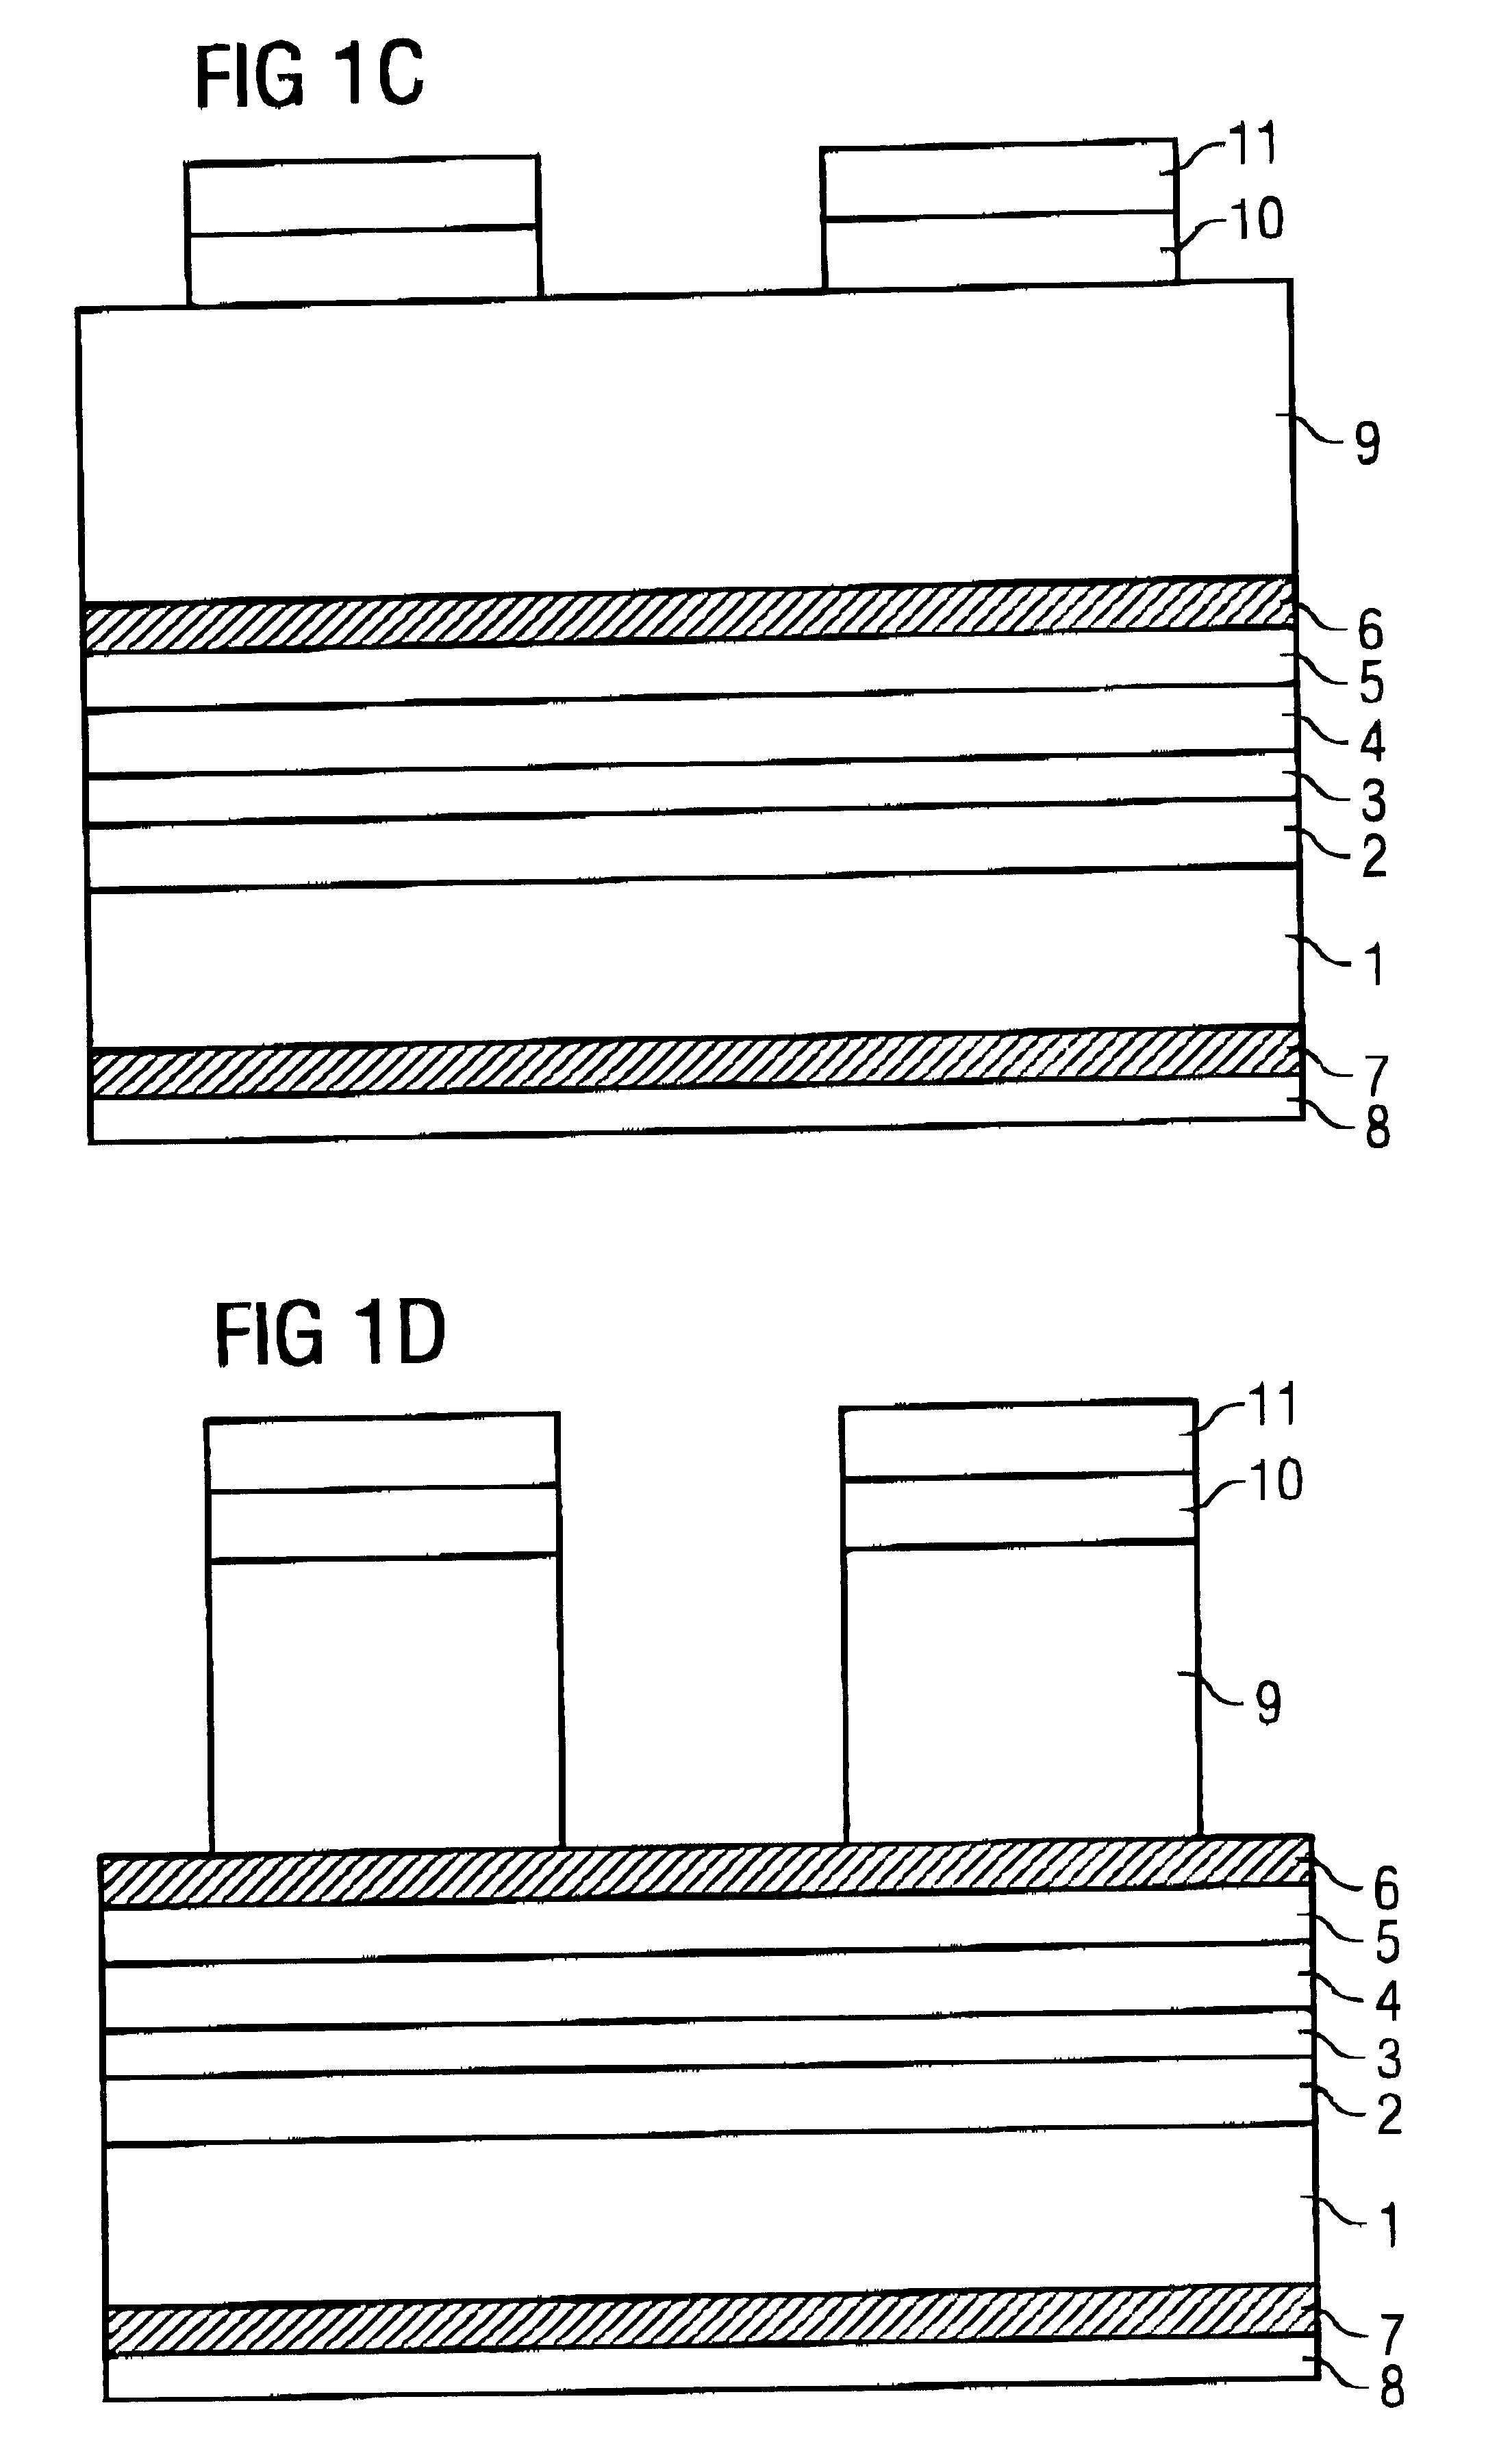 Method for formation and production of matrices of high density light emitting diodes